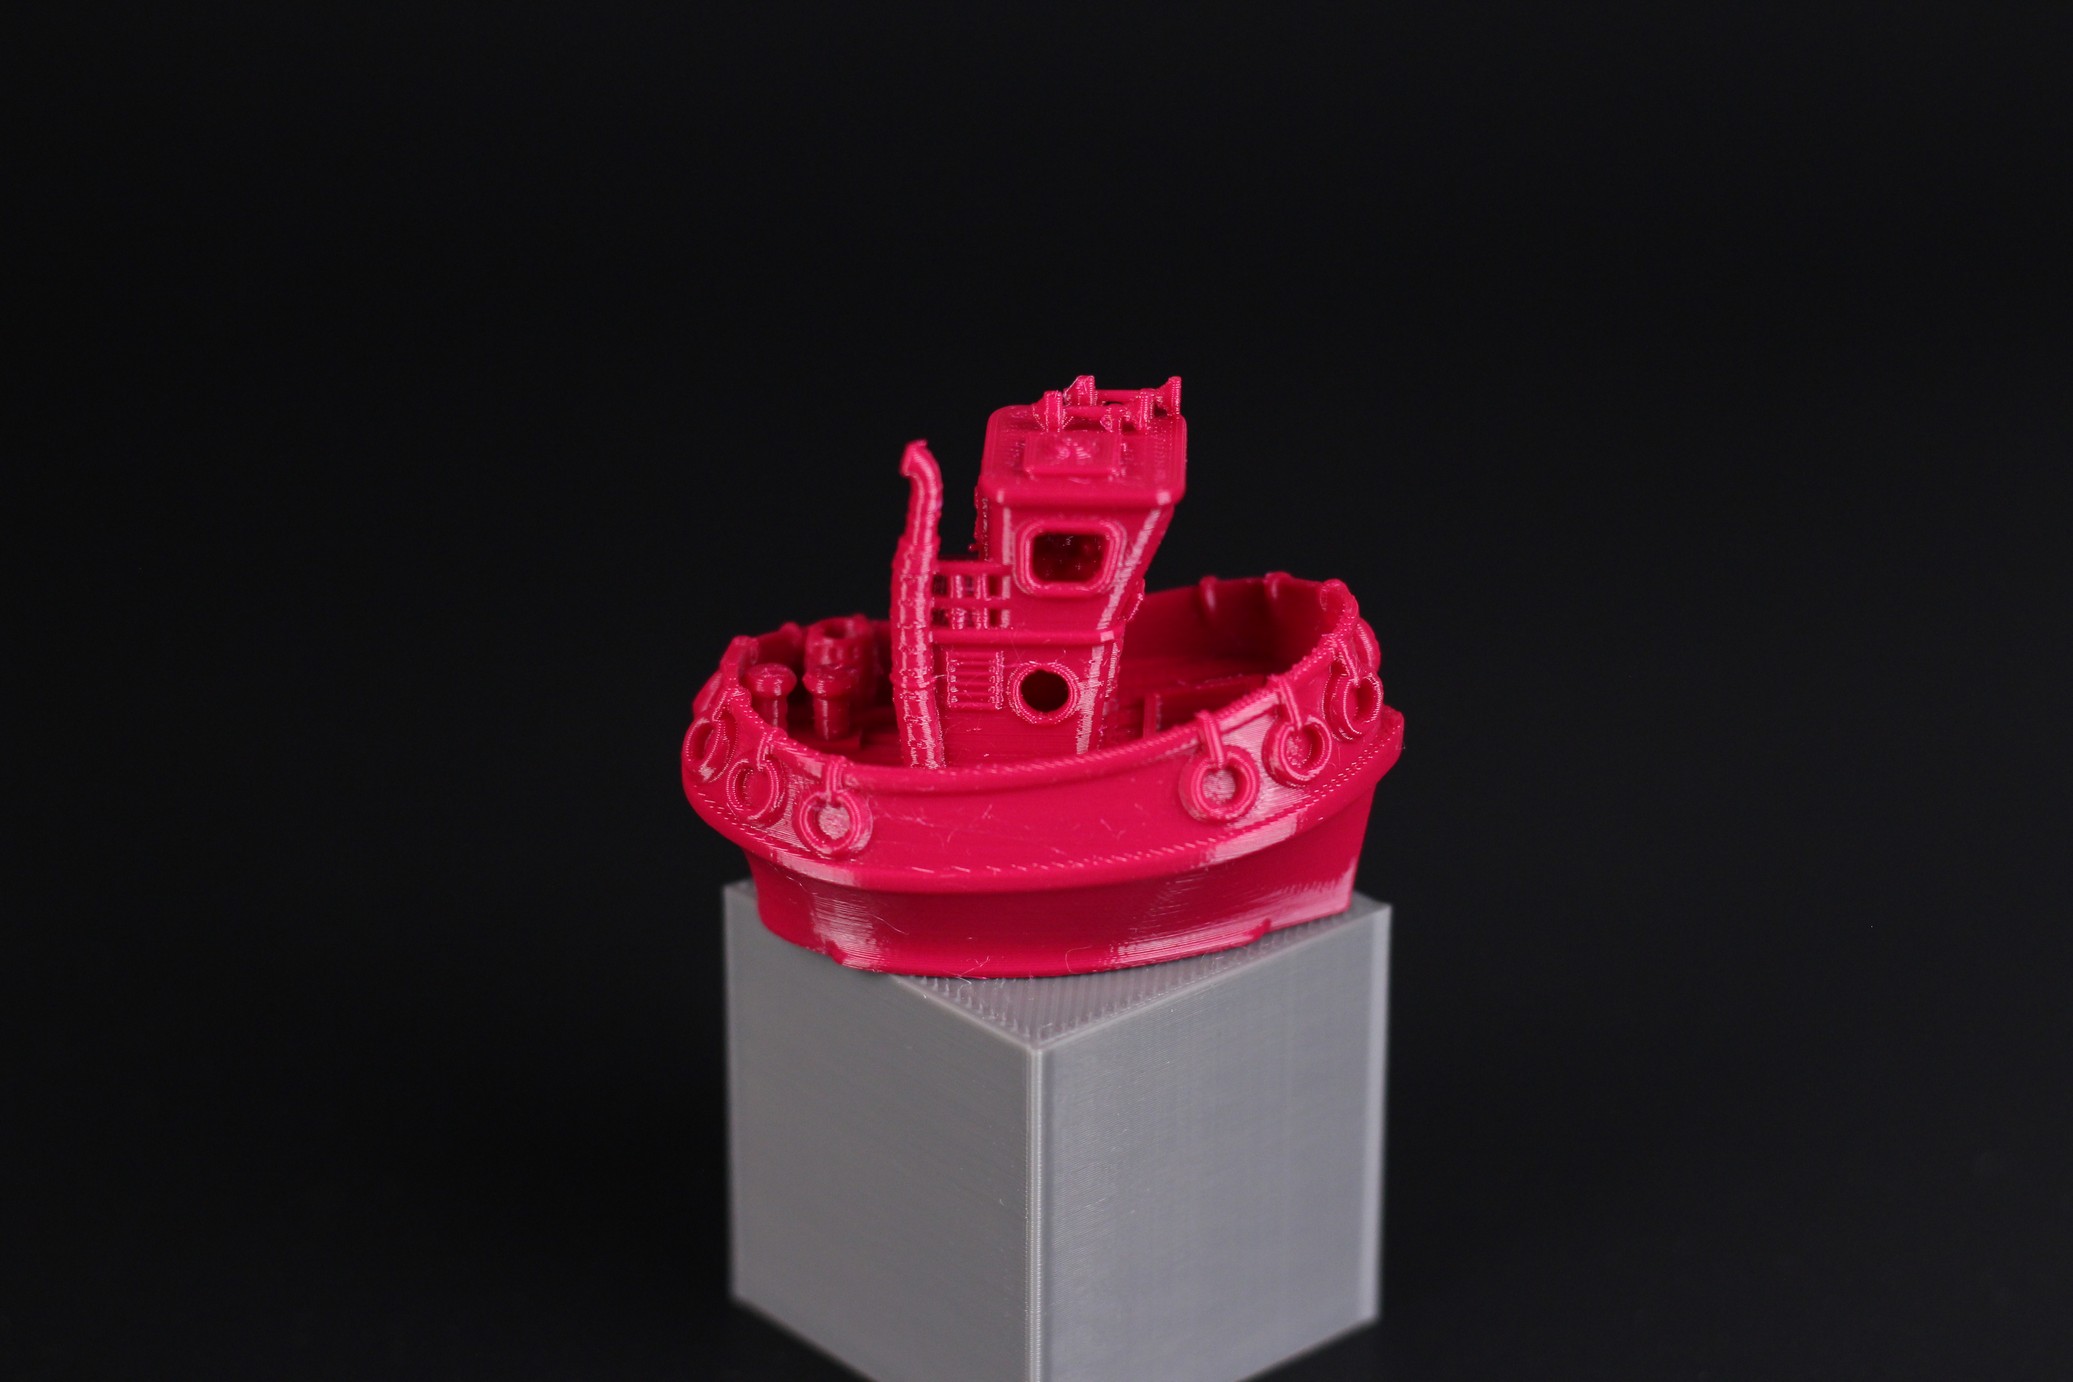 PETG Tubboat printed on Anycubic Kobra 1 | Anycubic Kobra Review: The New Budget Standard